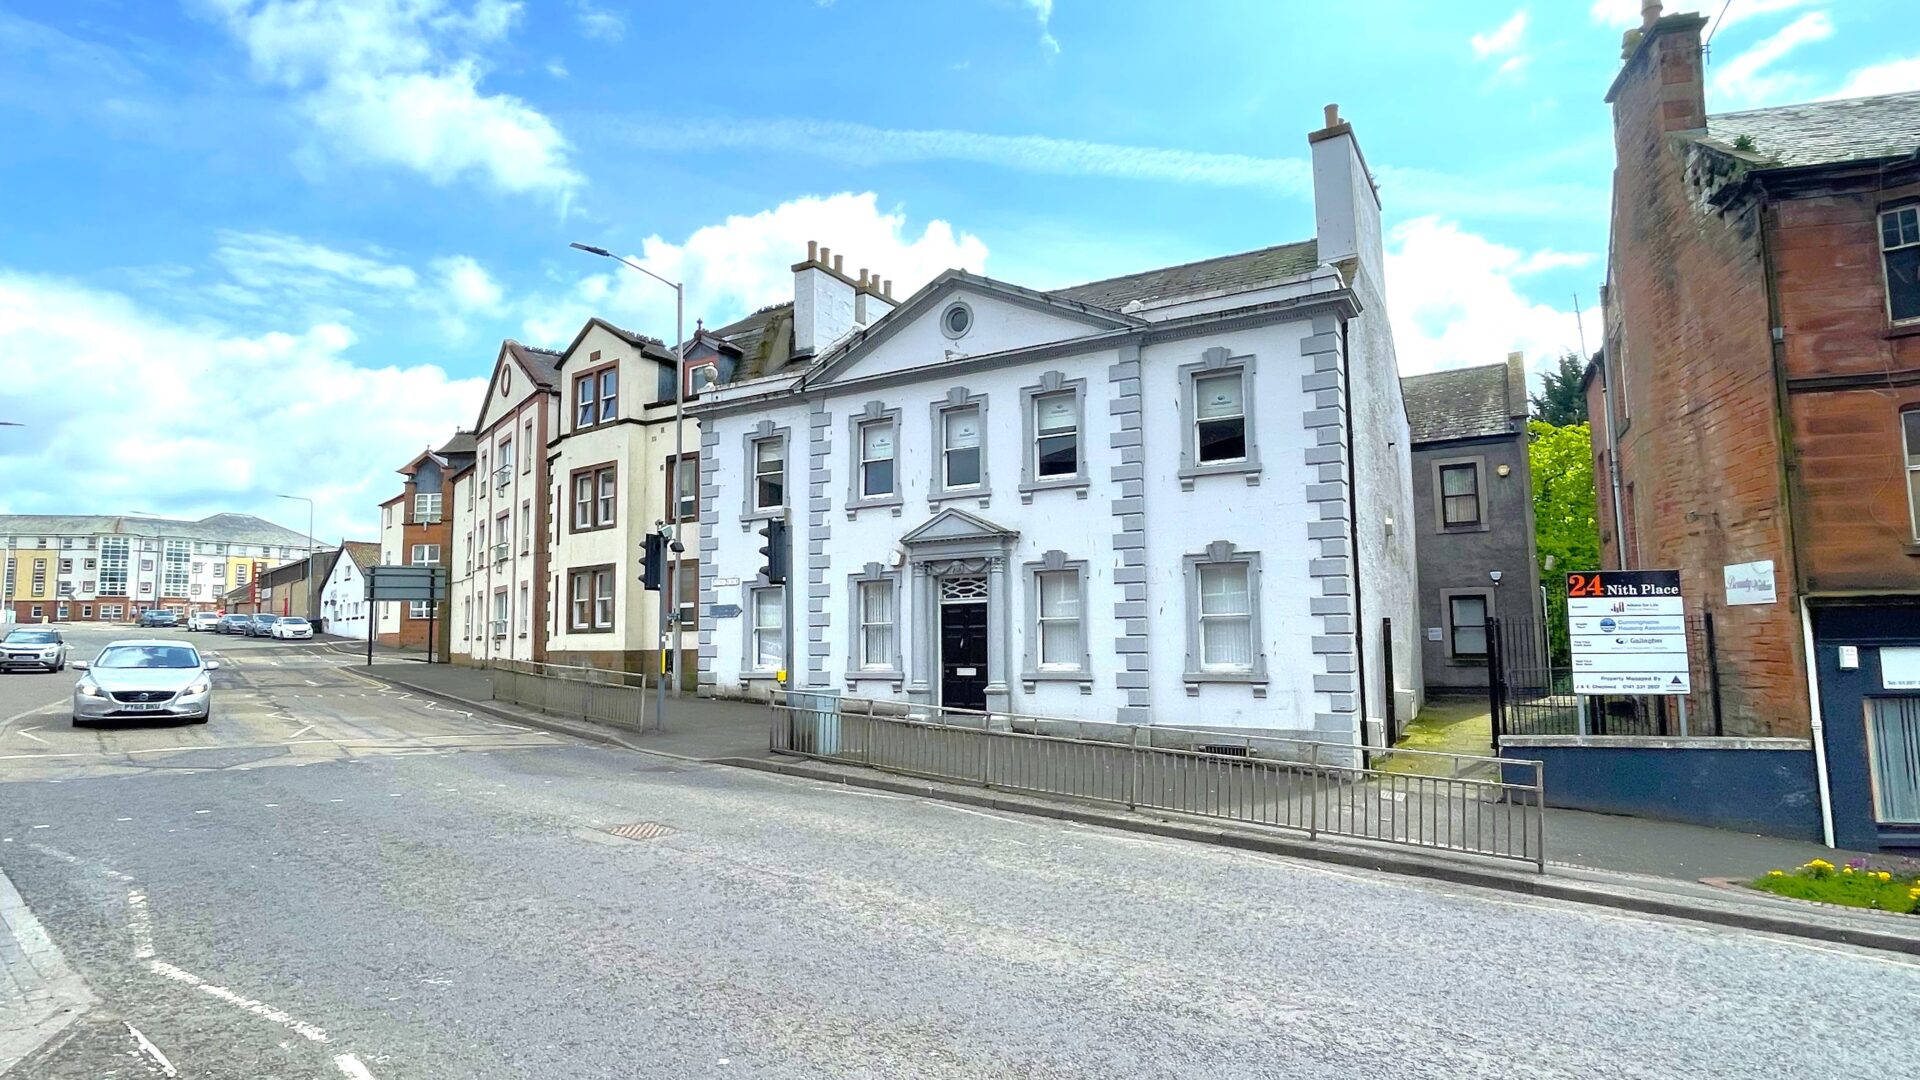 Shepherd brings to market town centre office building with residential redevelopment potential in Dumfries for sale